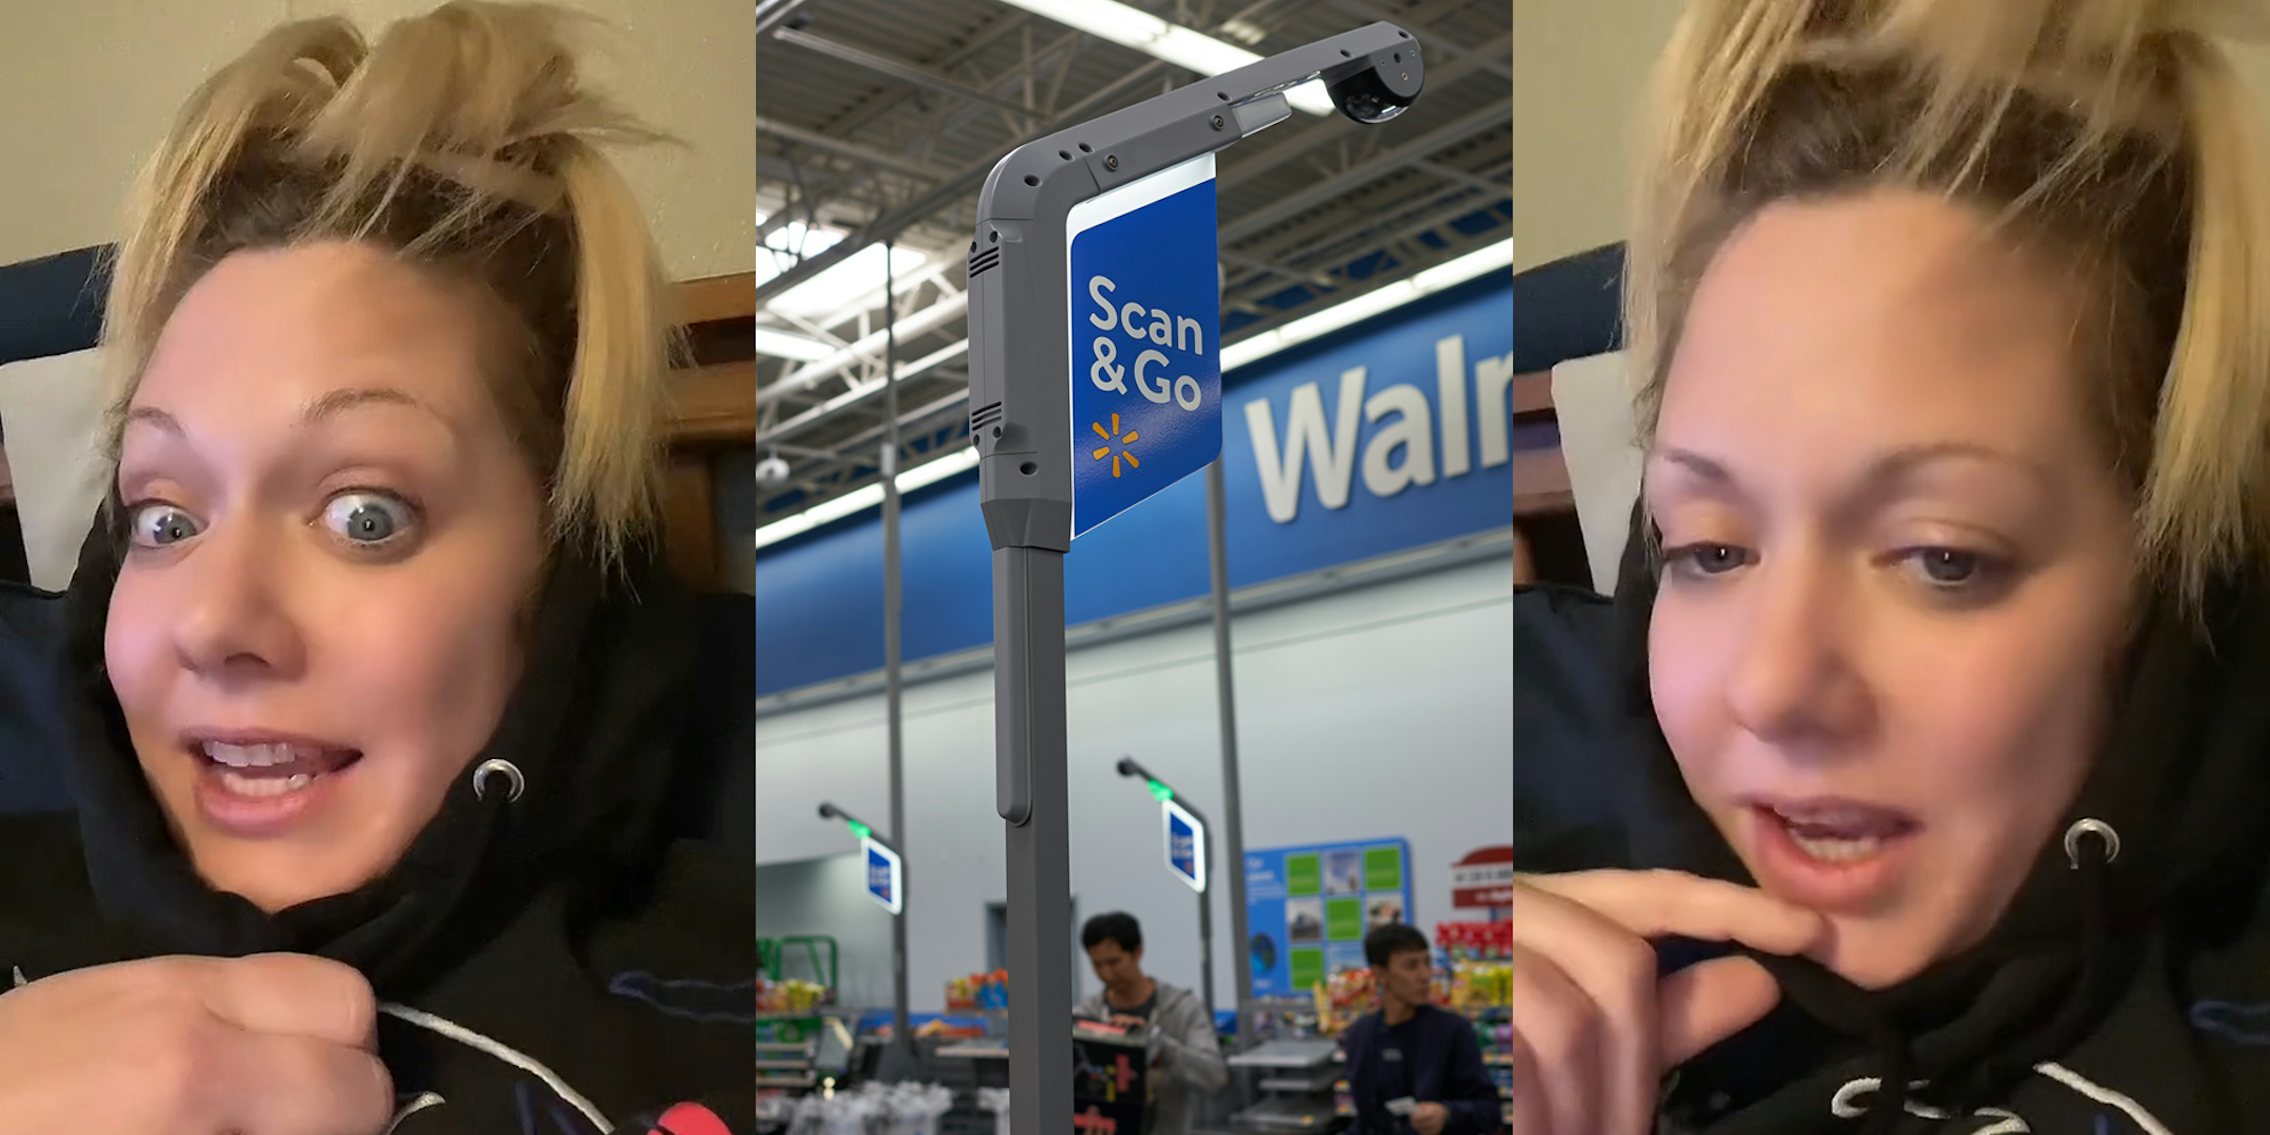 woman speaking in bed (l) Walmart self checkout Scan & Go sign (c) woman speaking in bed (r)